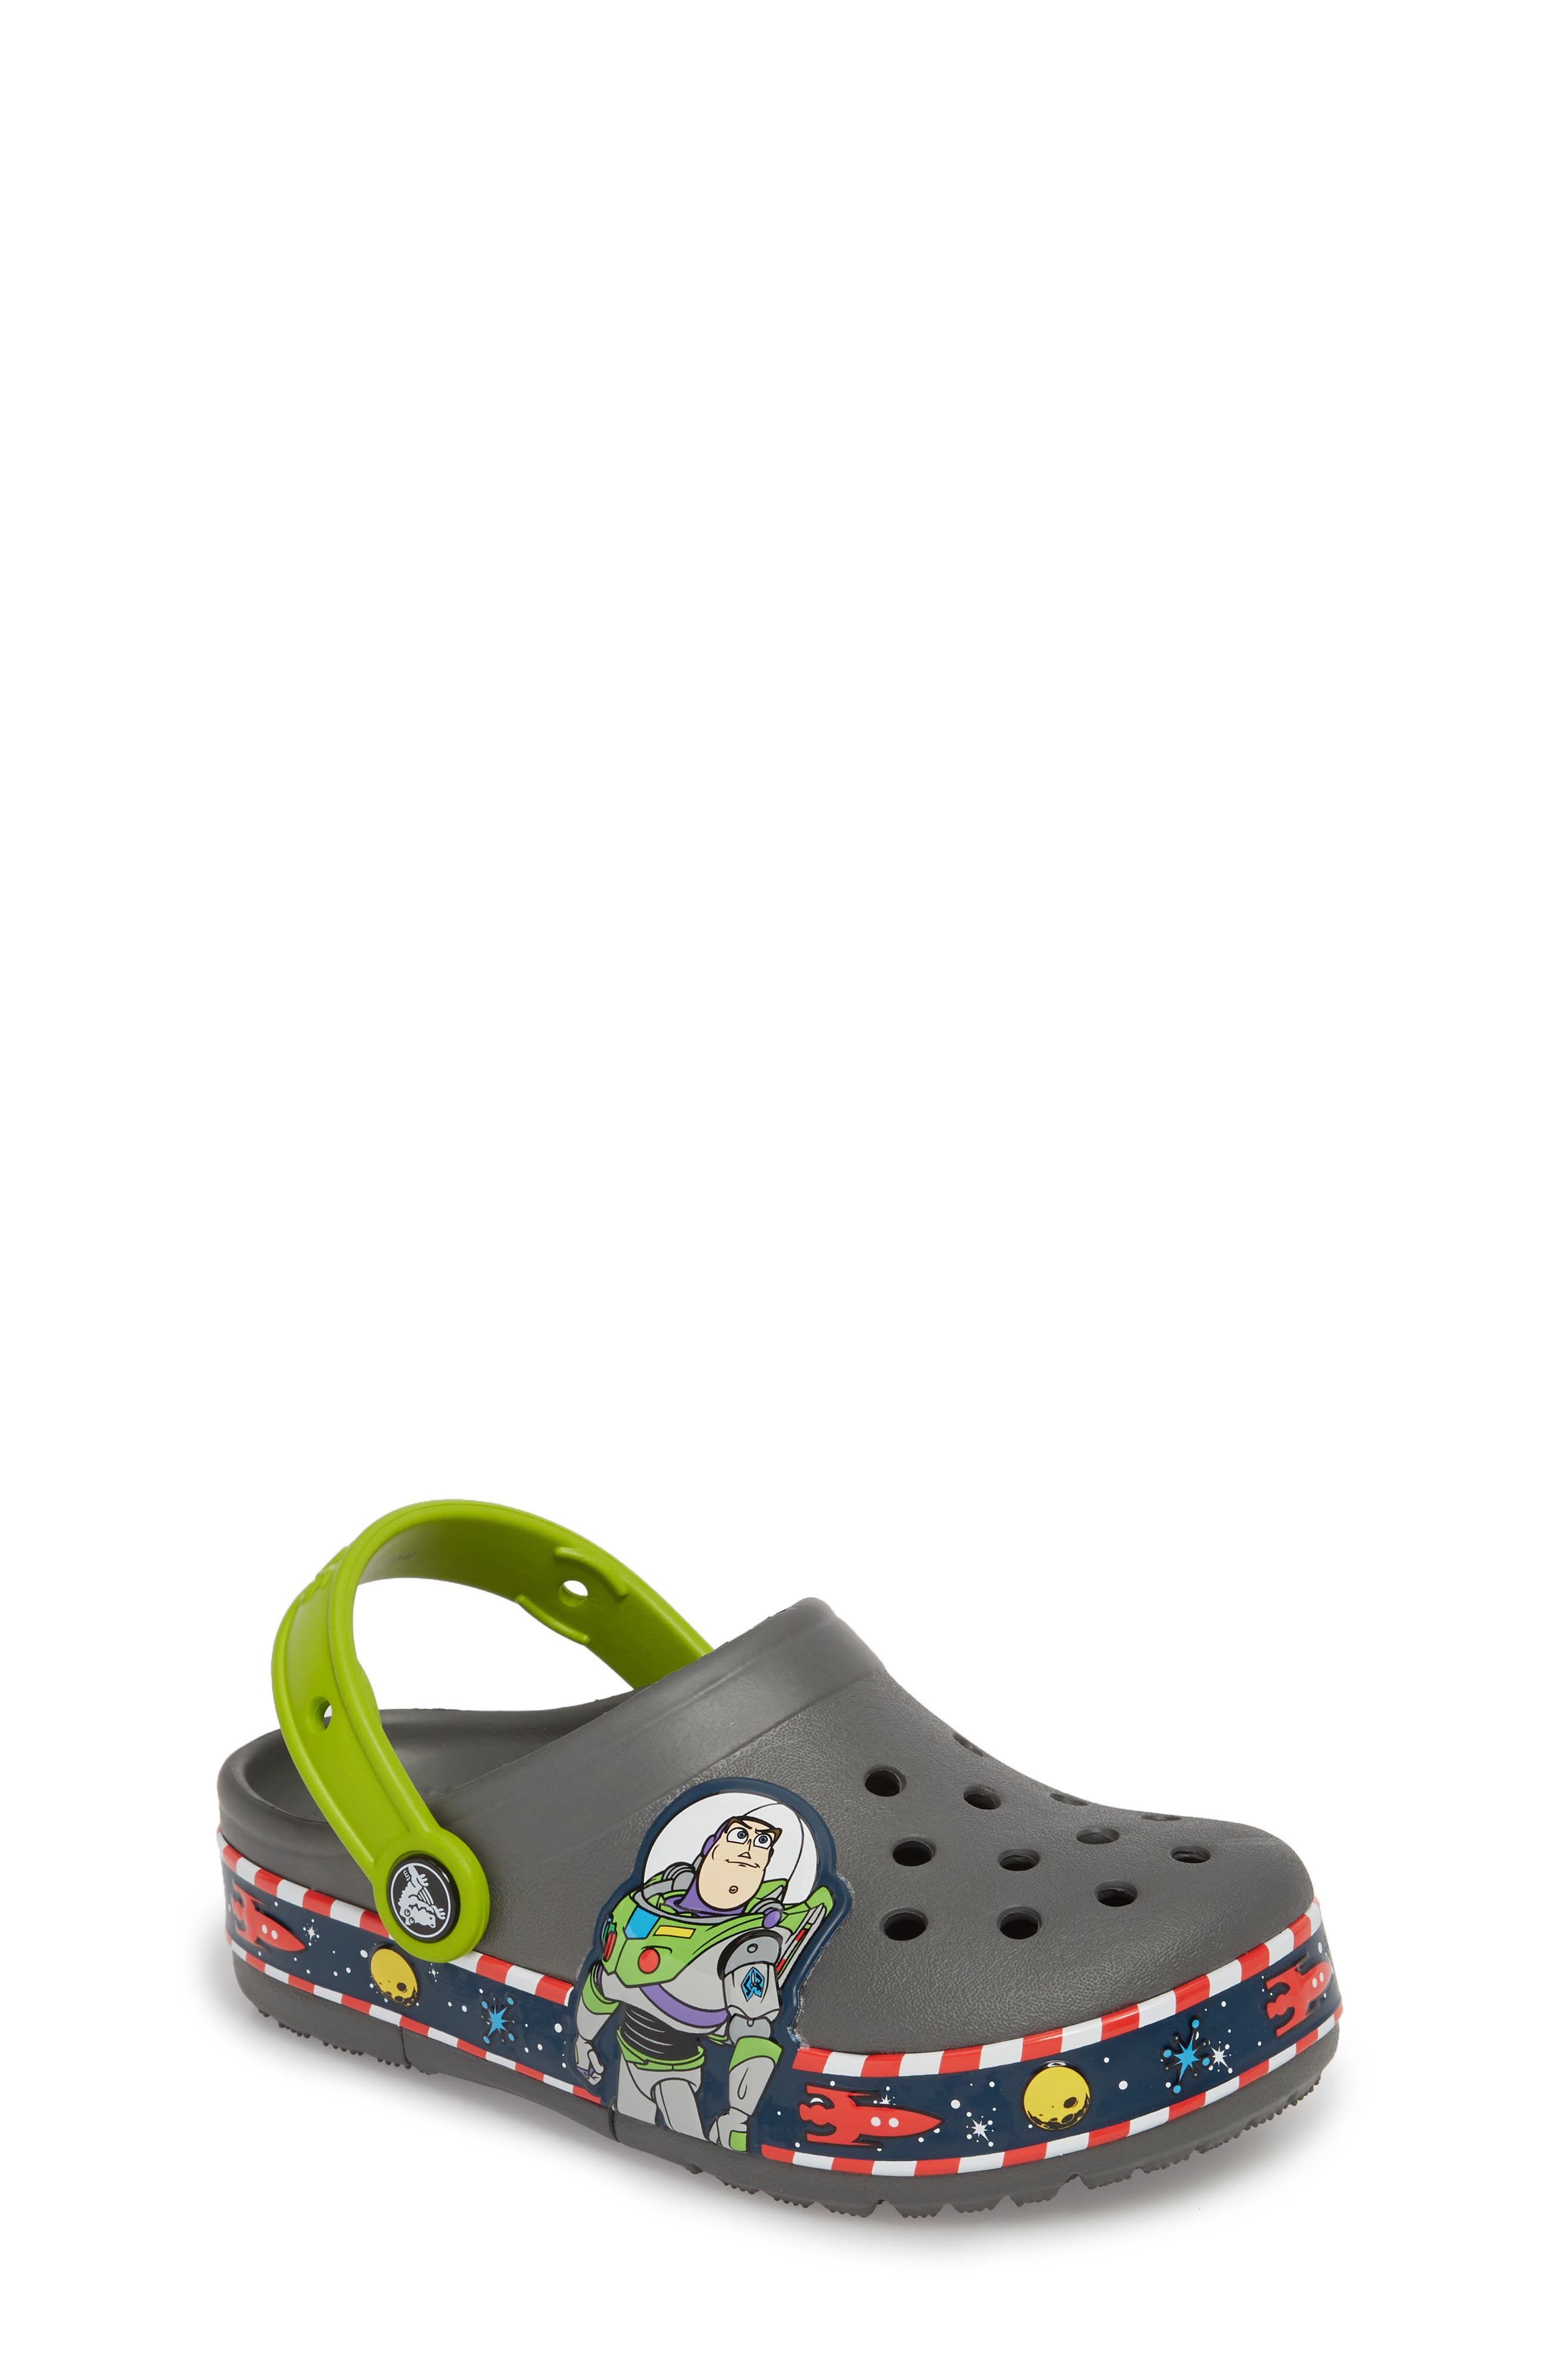 toy story crocs for toddlers